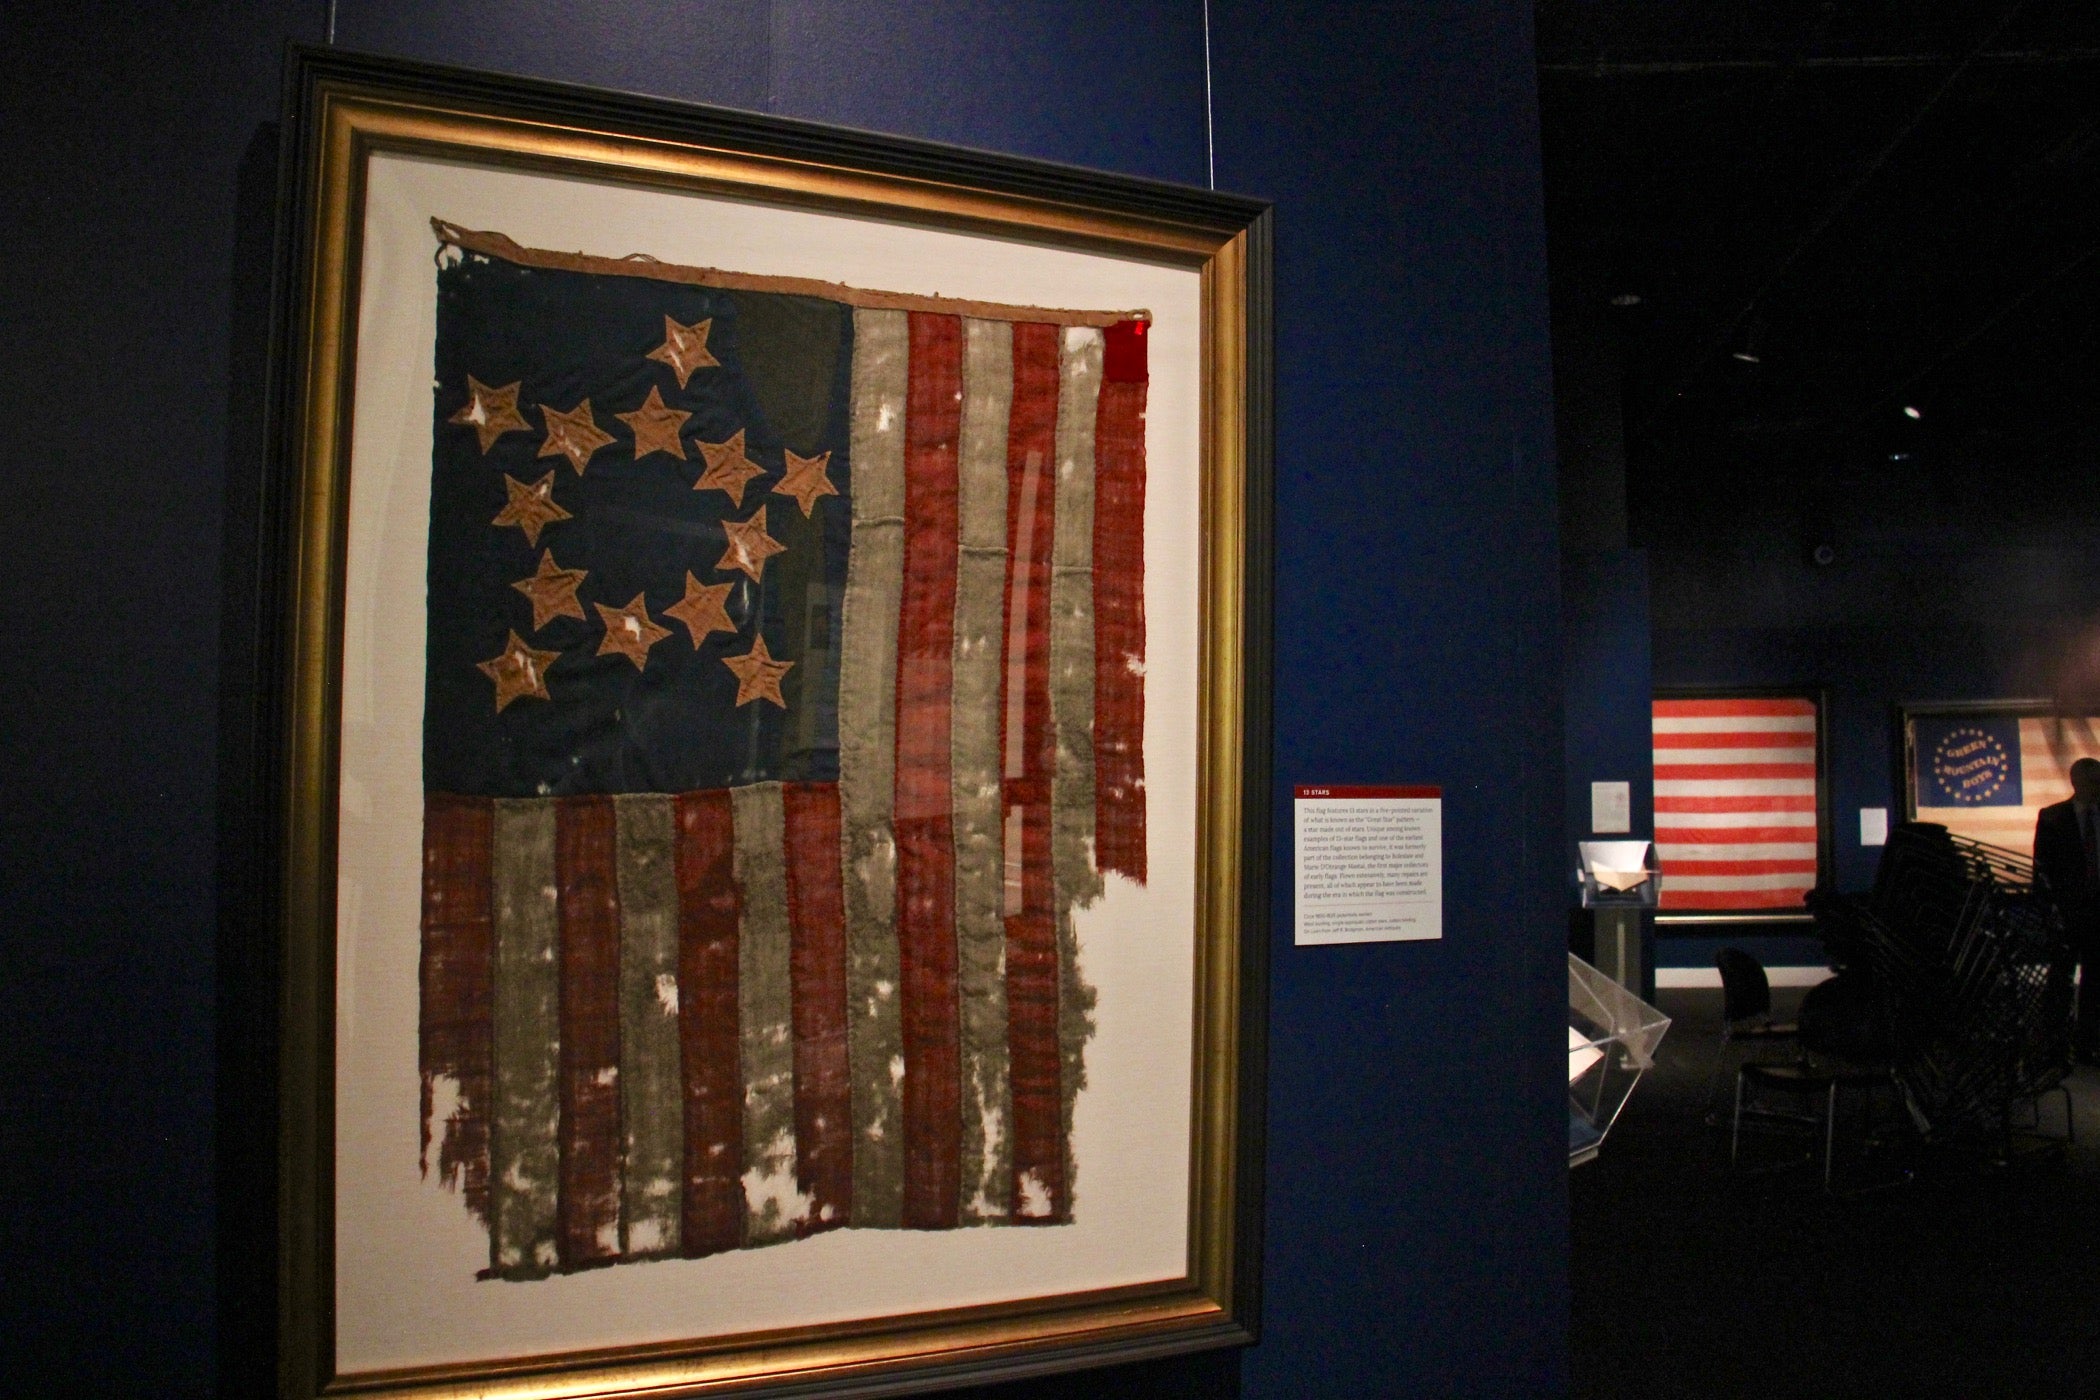 The American flag unfolds a history of national ideals - WHYY